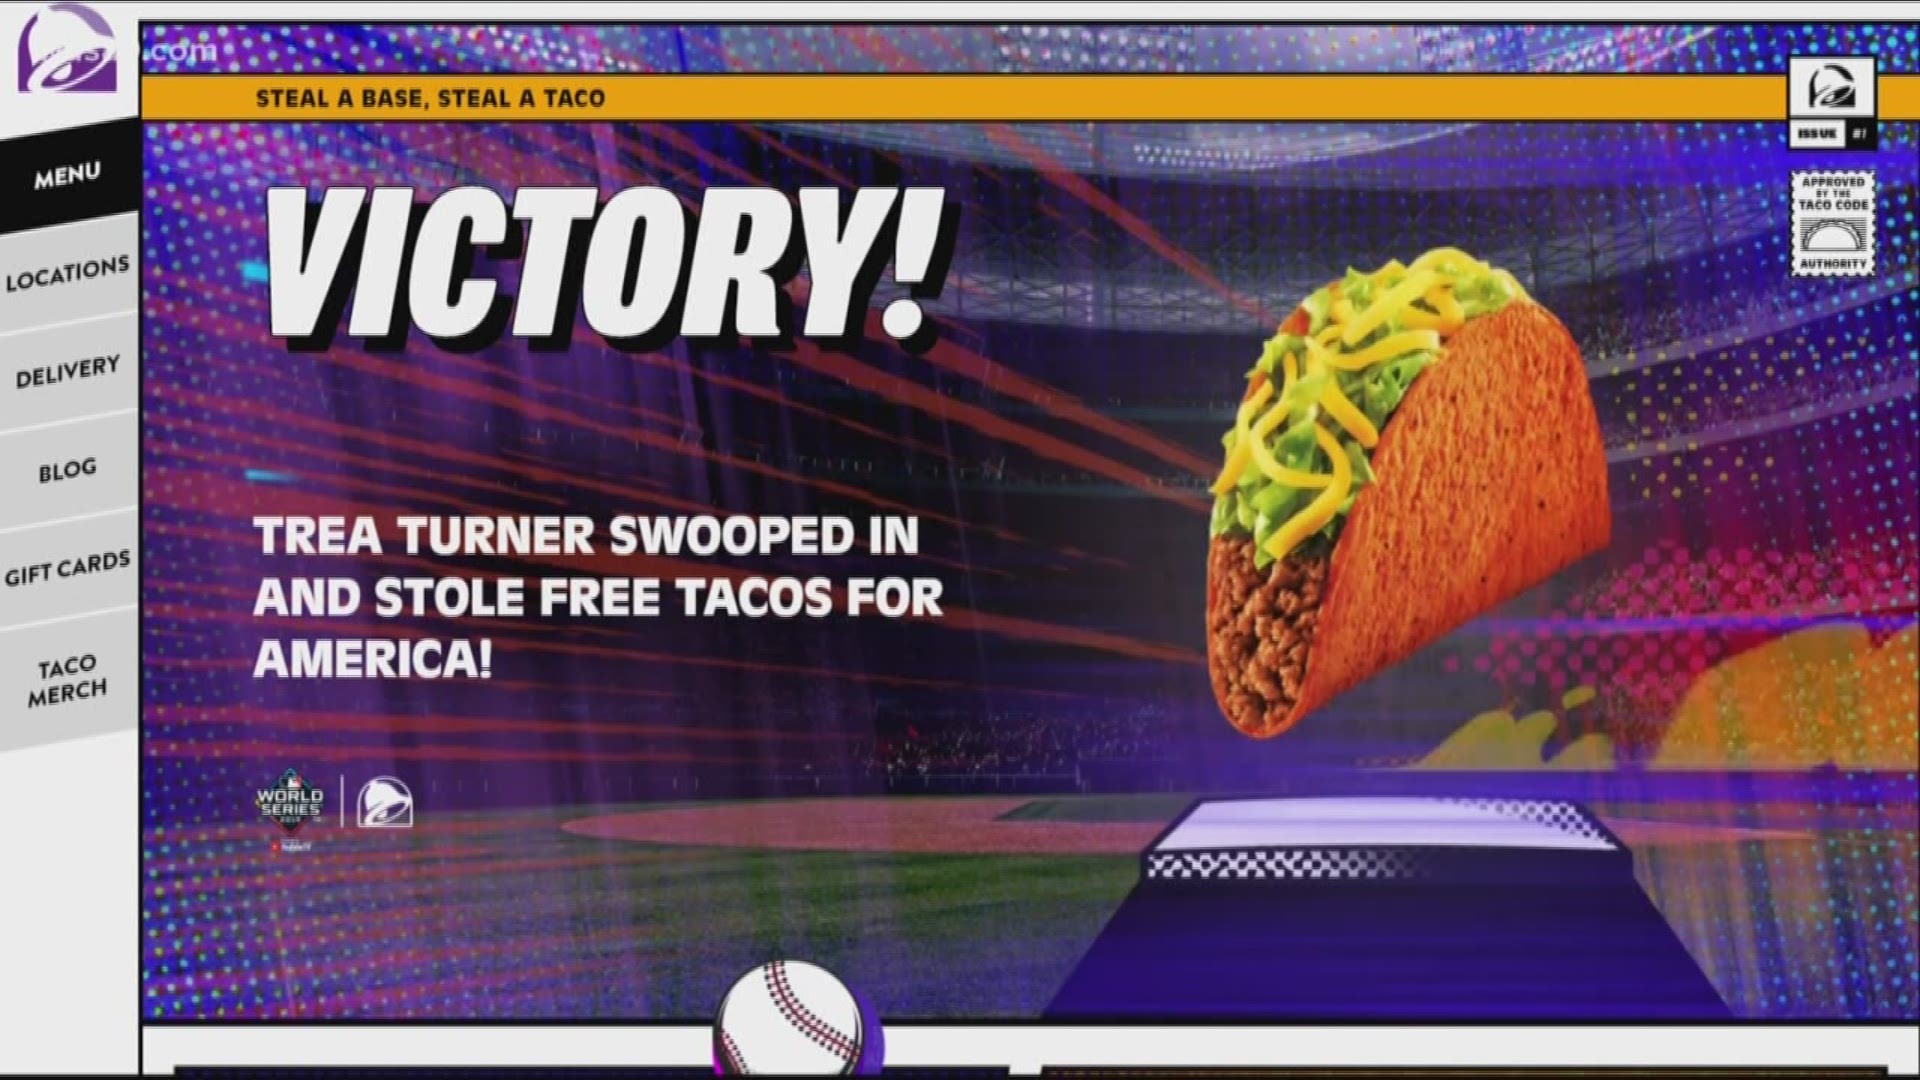 The Nationals shortstop hit an infield single to start the game and then stole second base. Taco Bell will now give out free Doritos® Locos tacos.